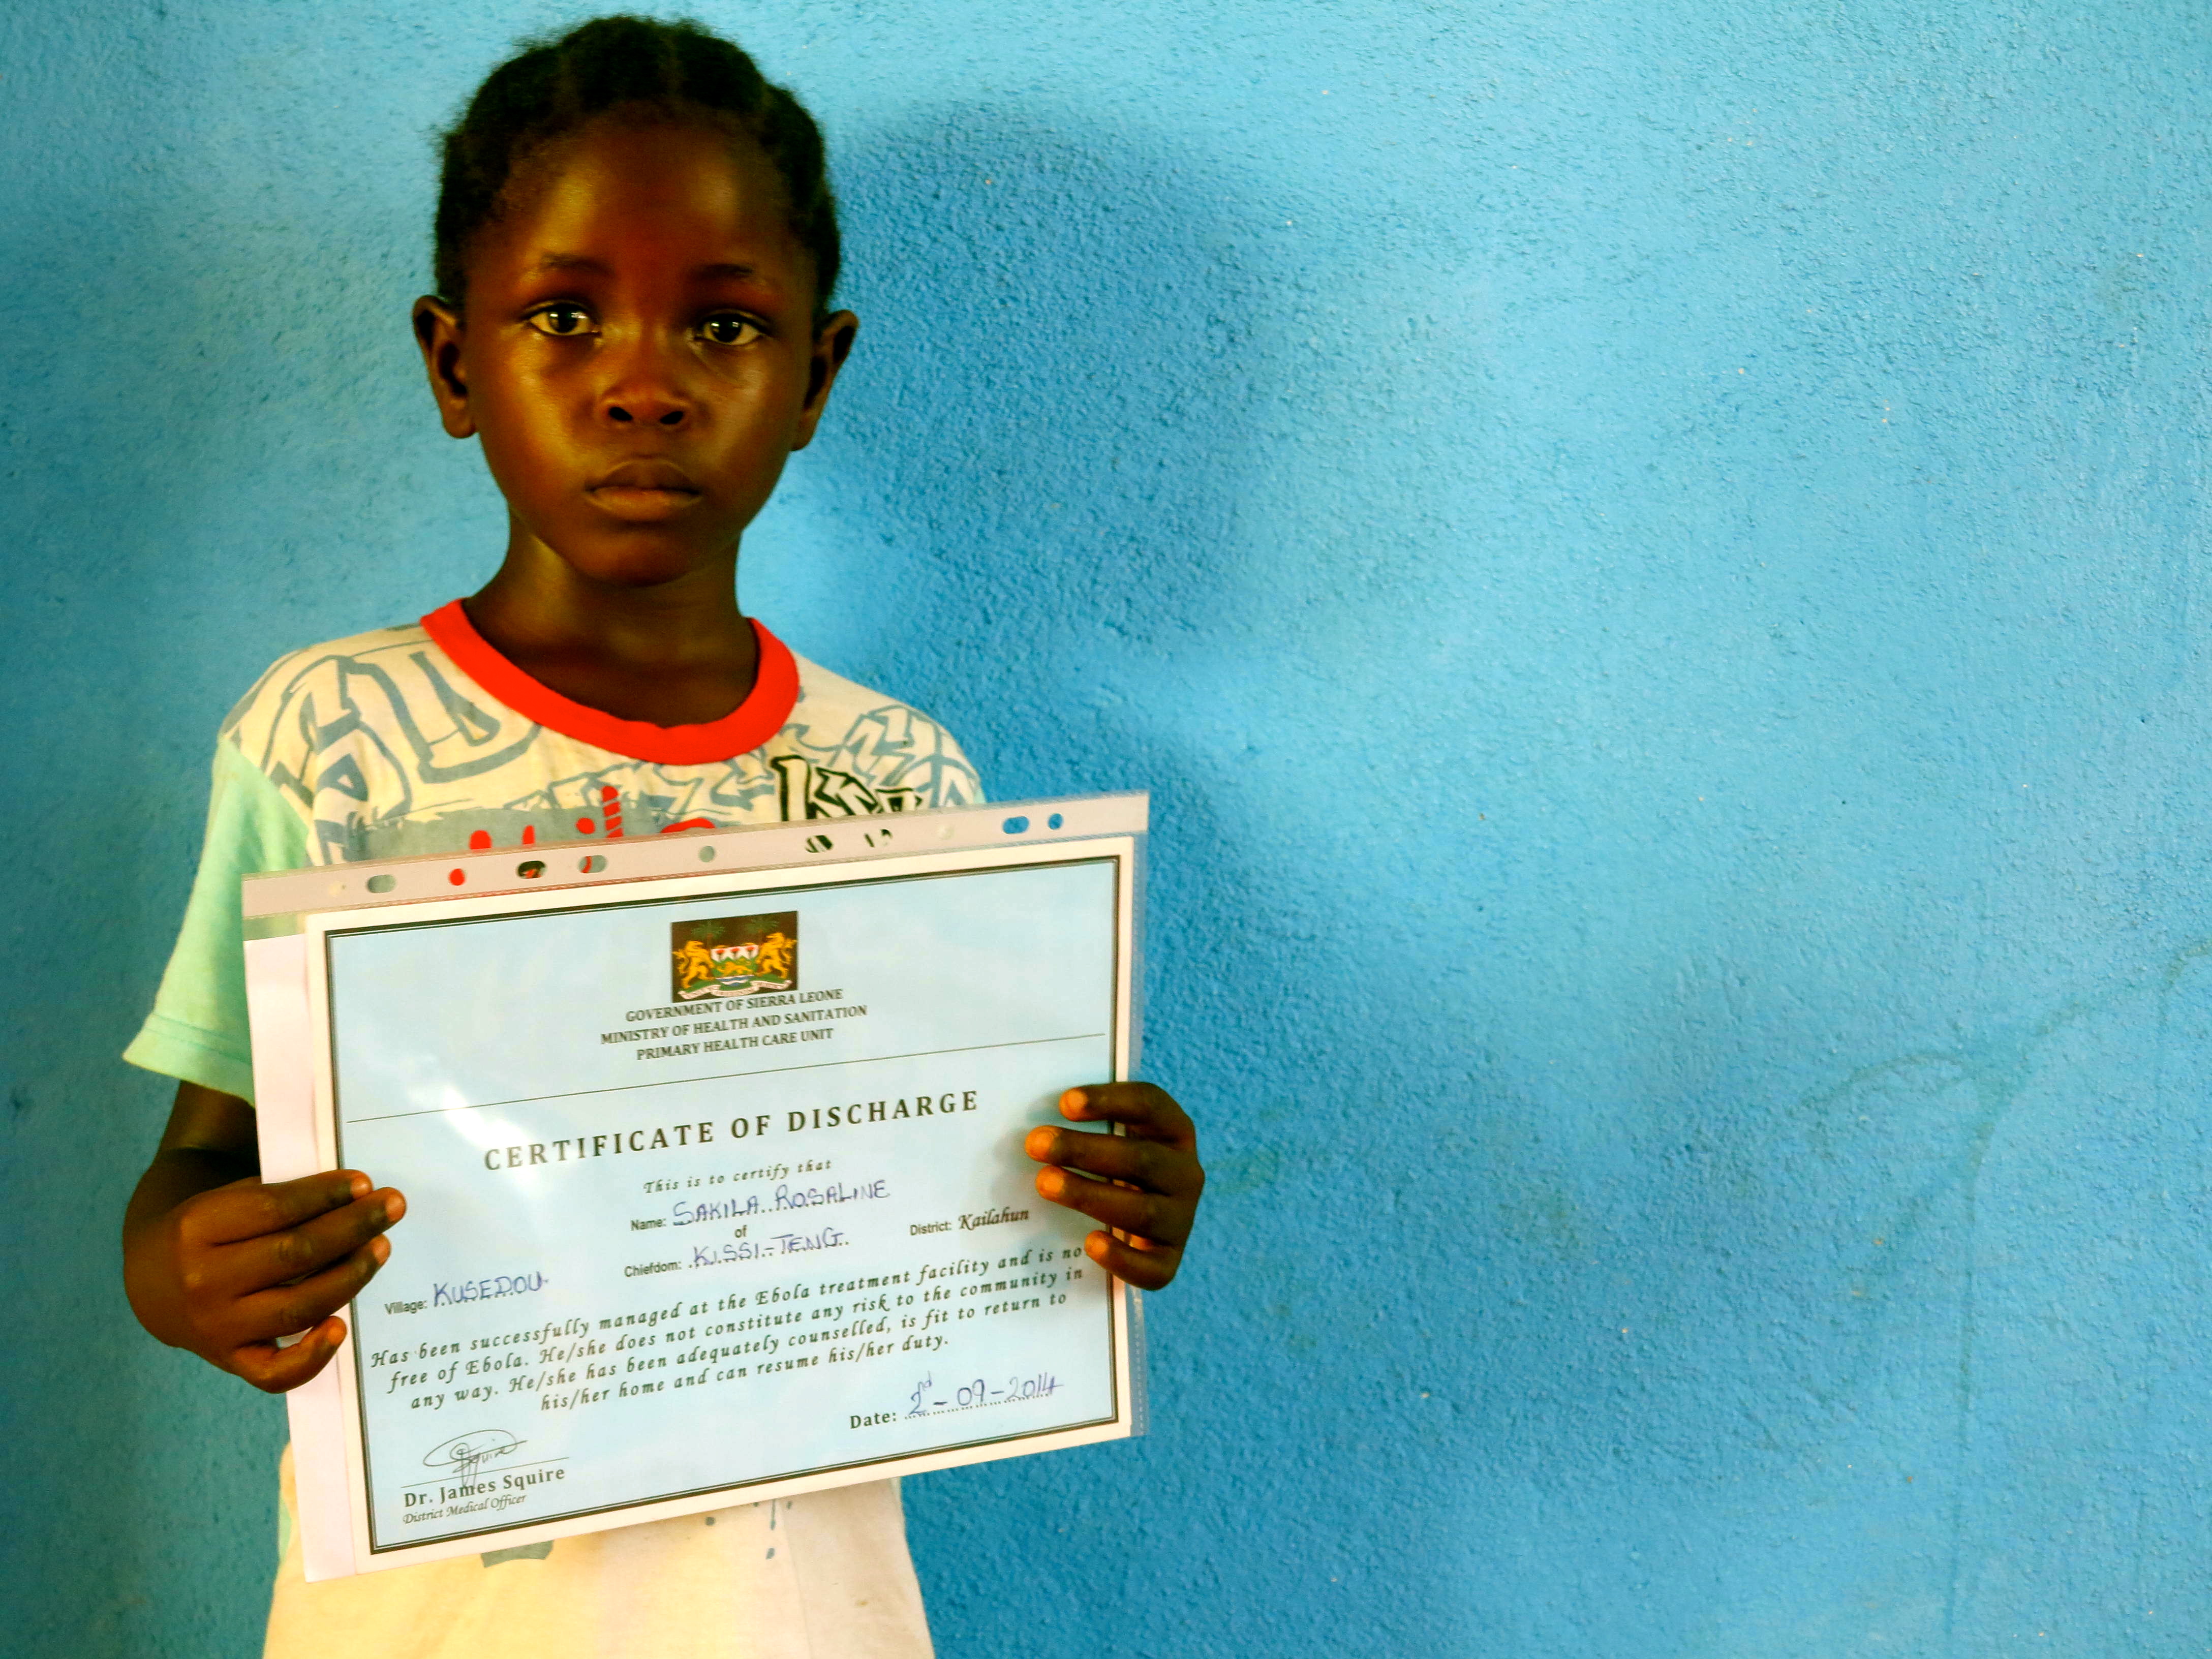 Rose shows off her certificate of good health that was issued to her by the Ministry of Health and Sanitation when she left the Ebola treatment center in Sierra Leone. 